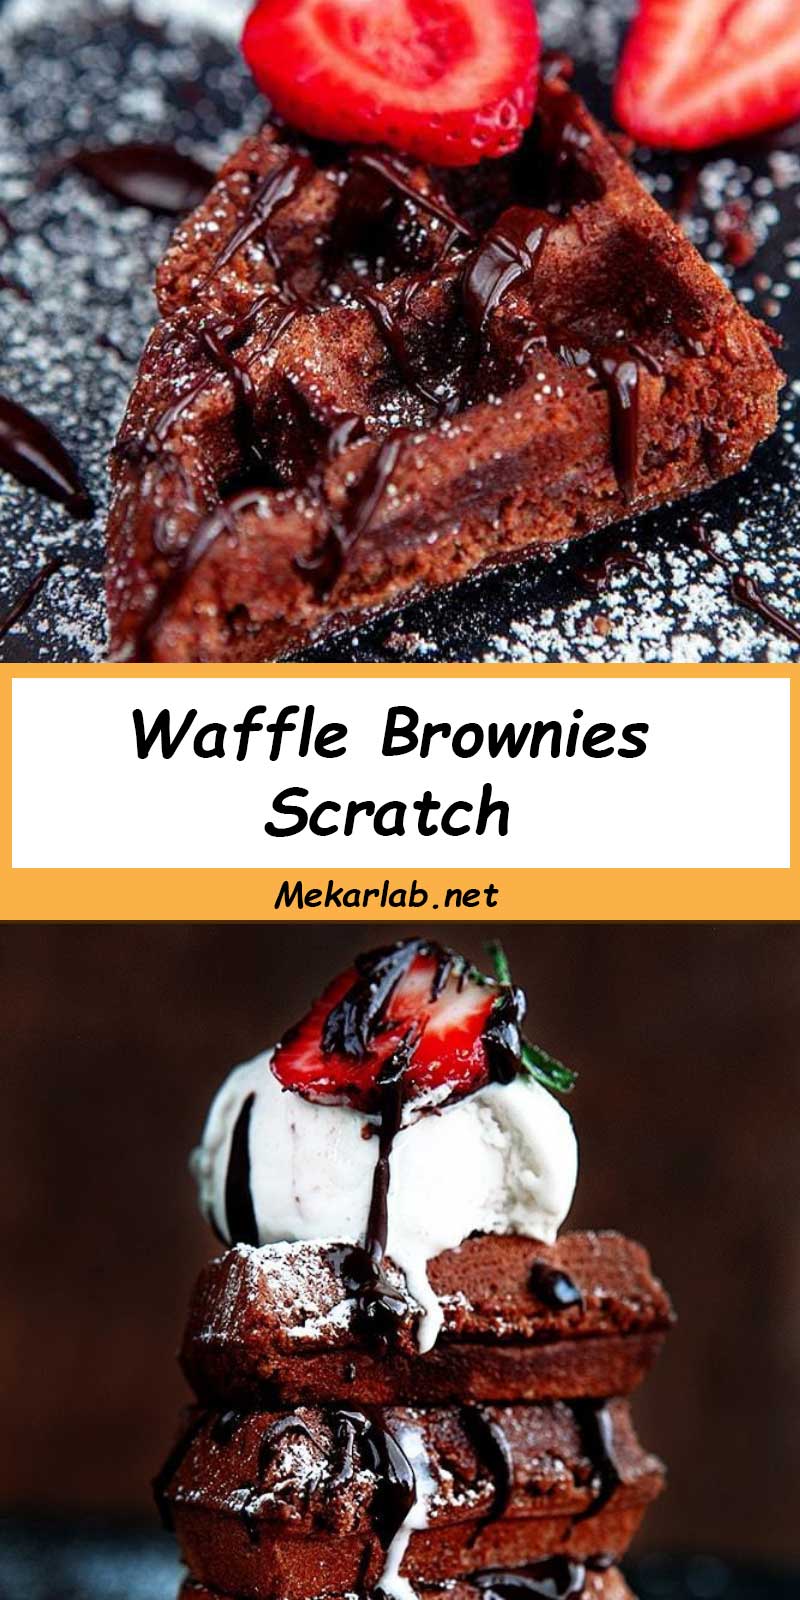 Waffle Brownies Scratch